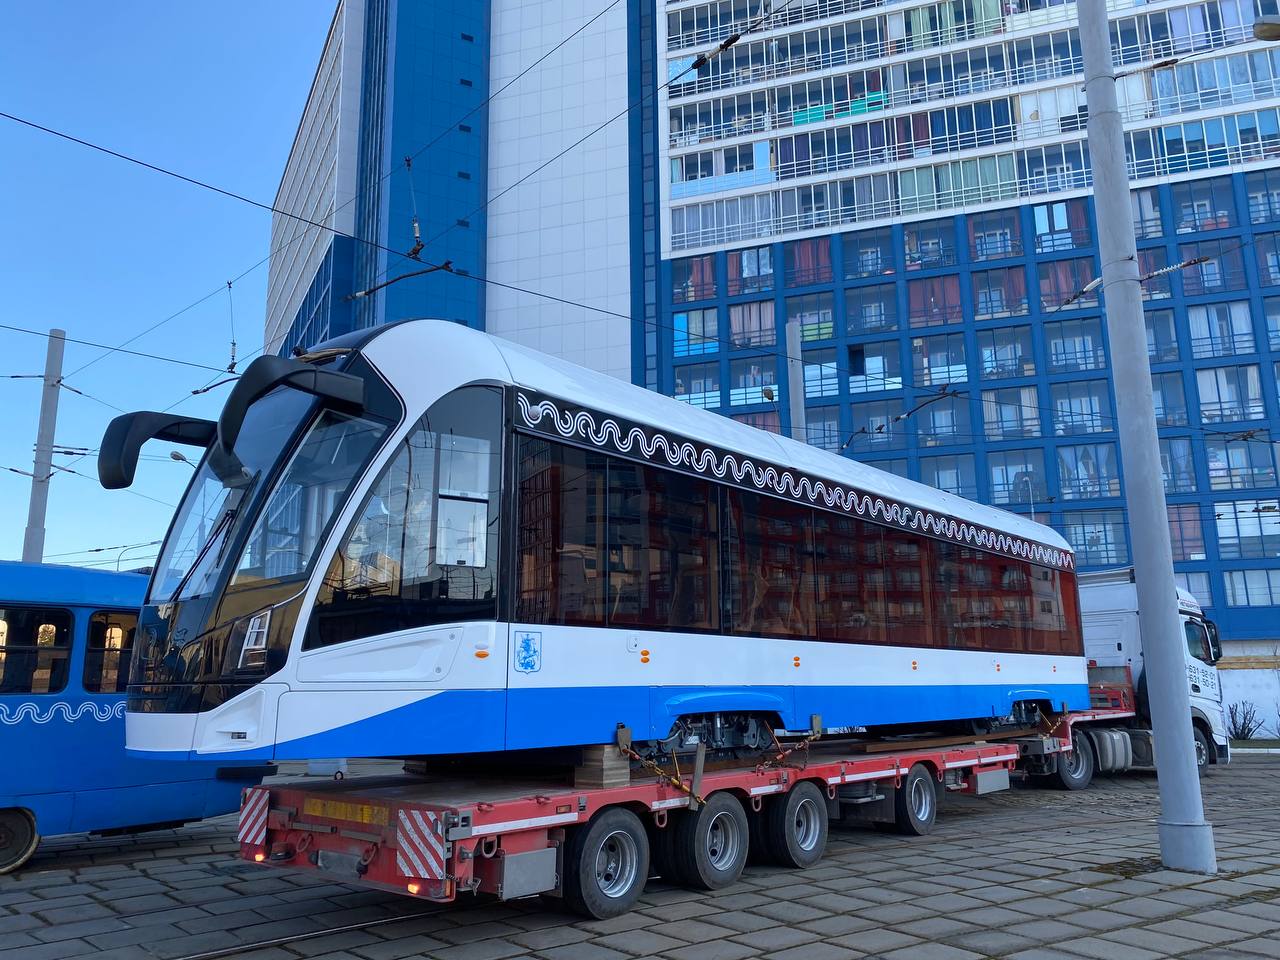 Moscow — Trams without fleet numbers